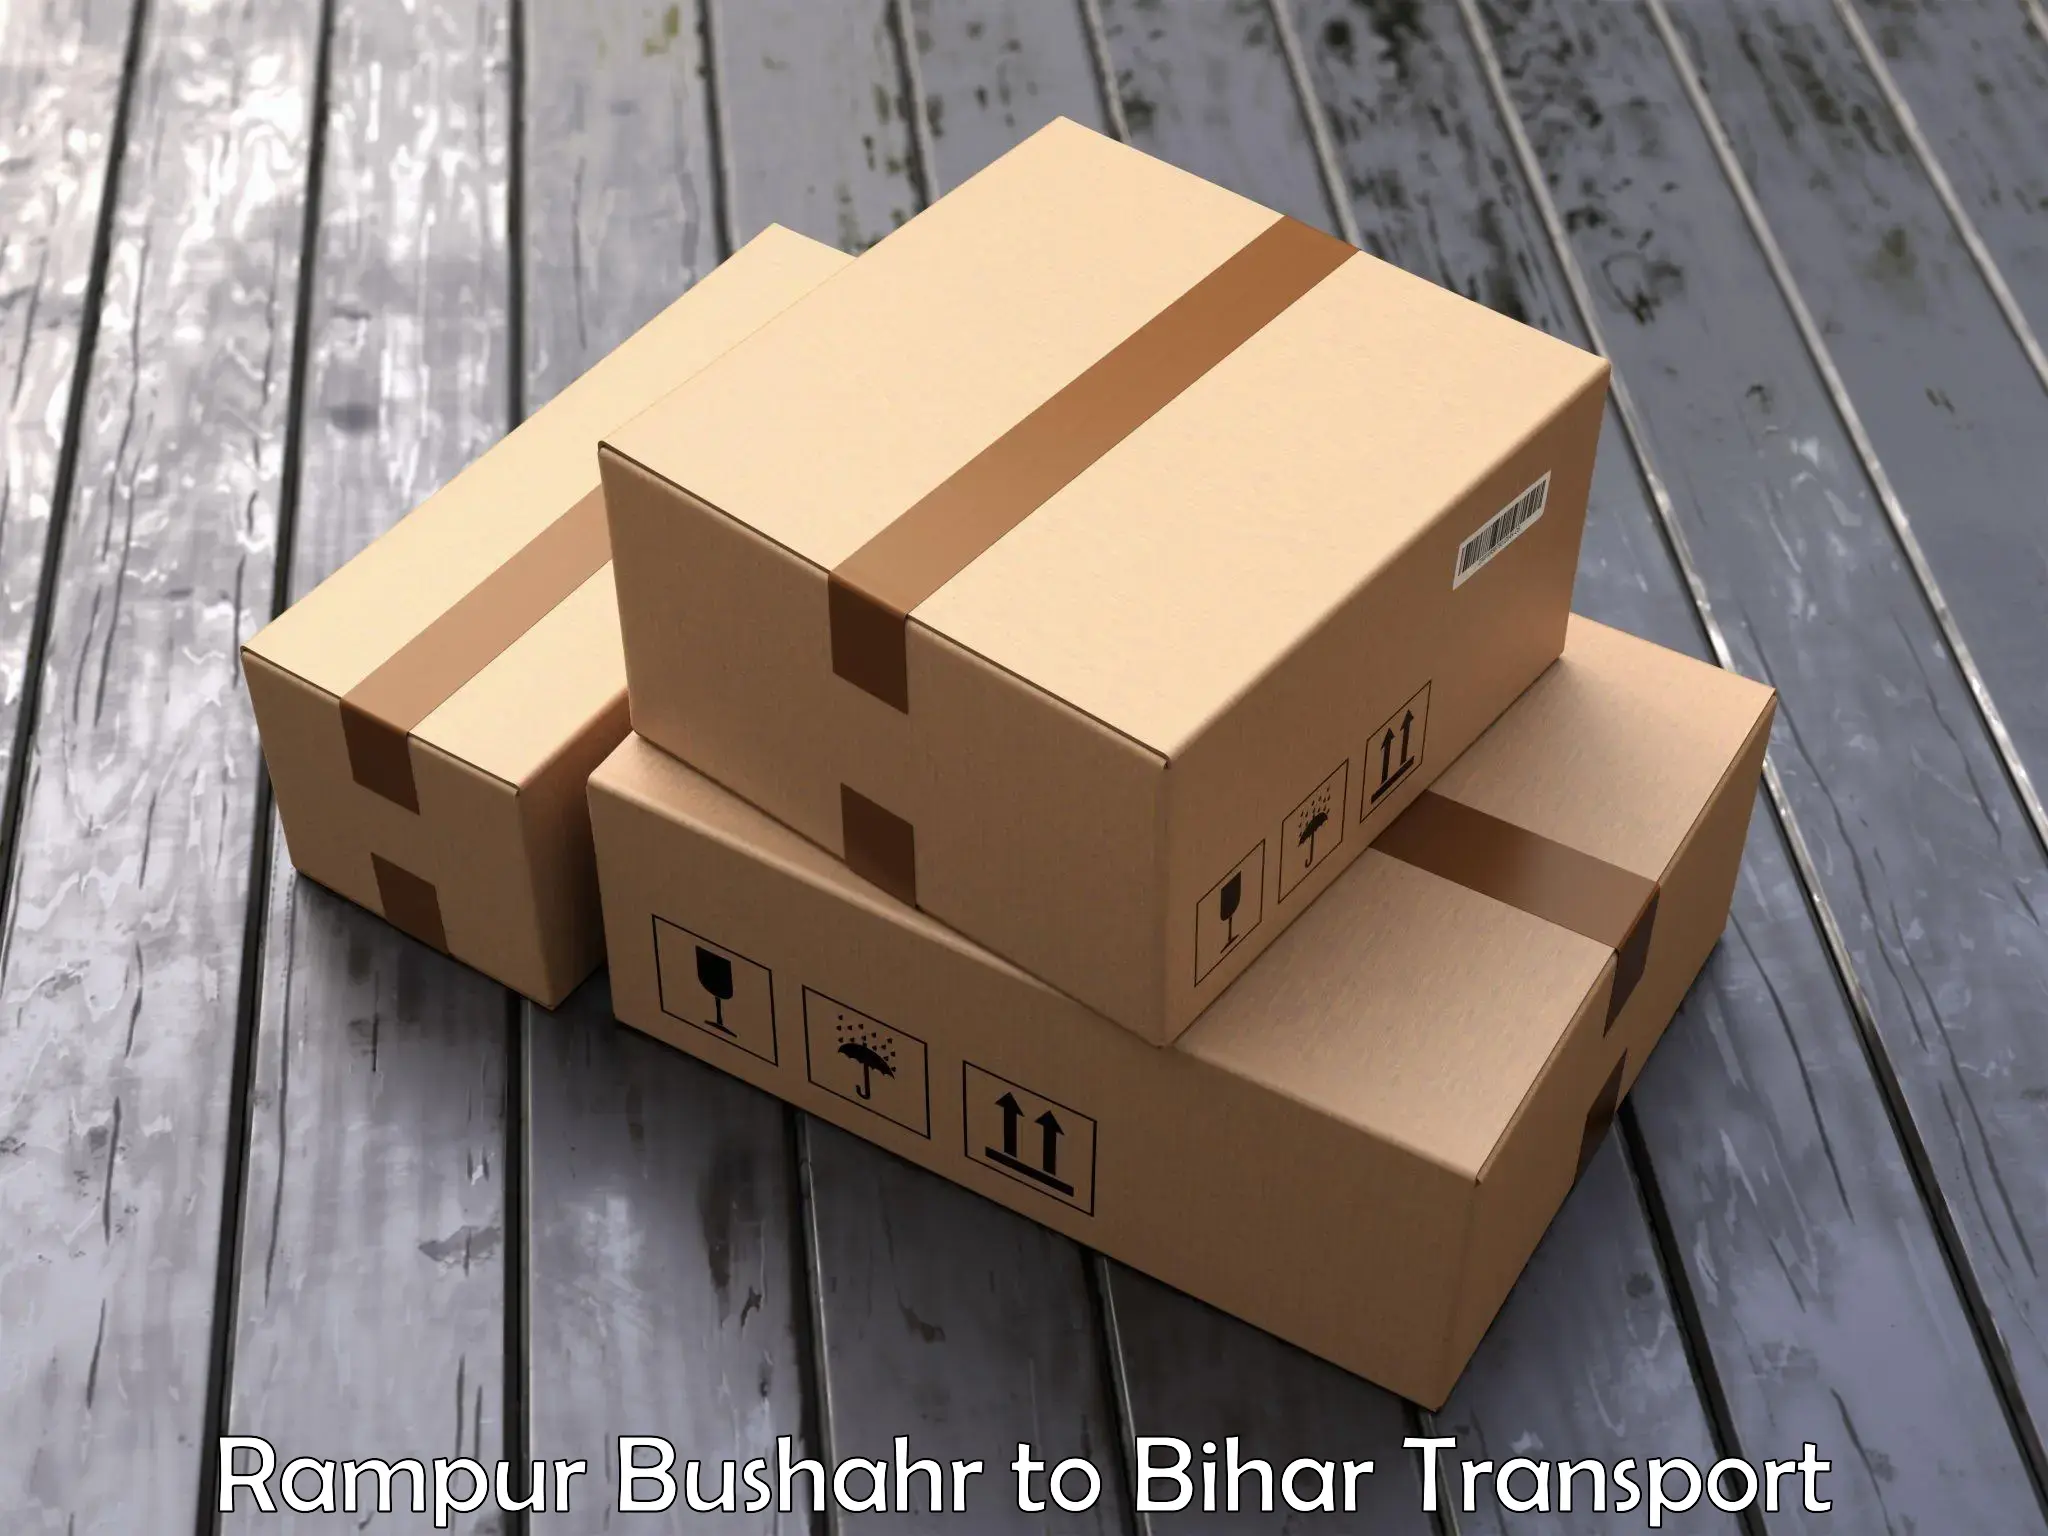 Daily parcel service transport Rampur Bushahr to Jehanabad